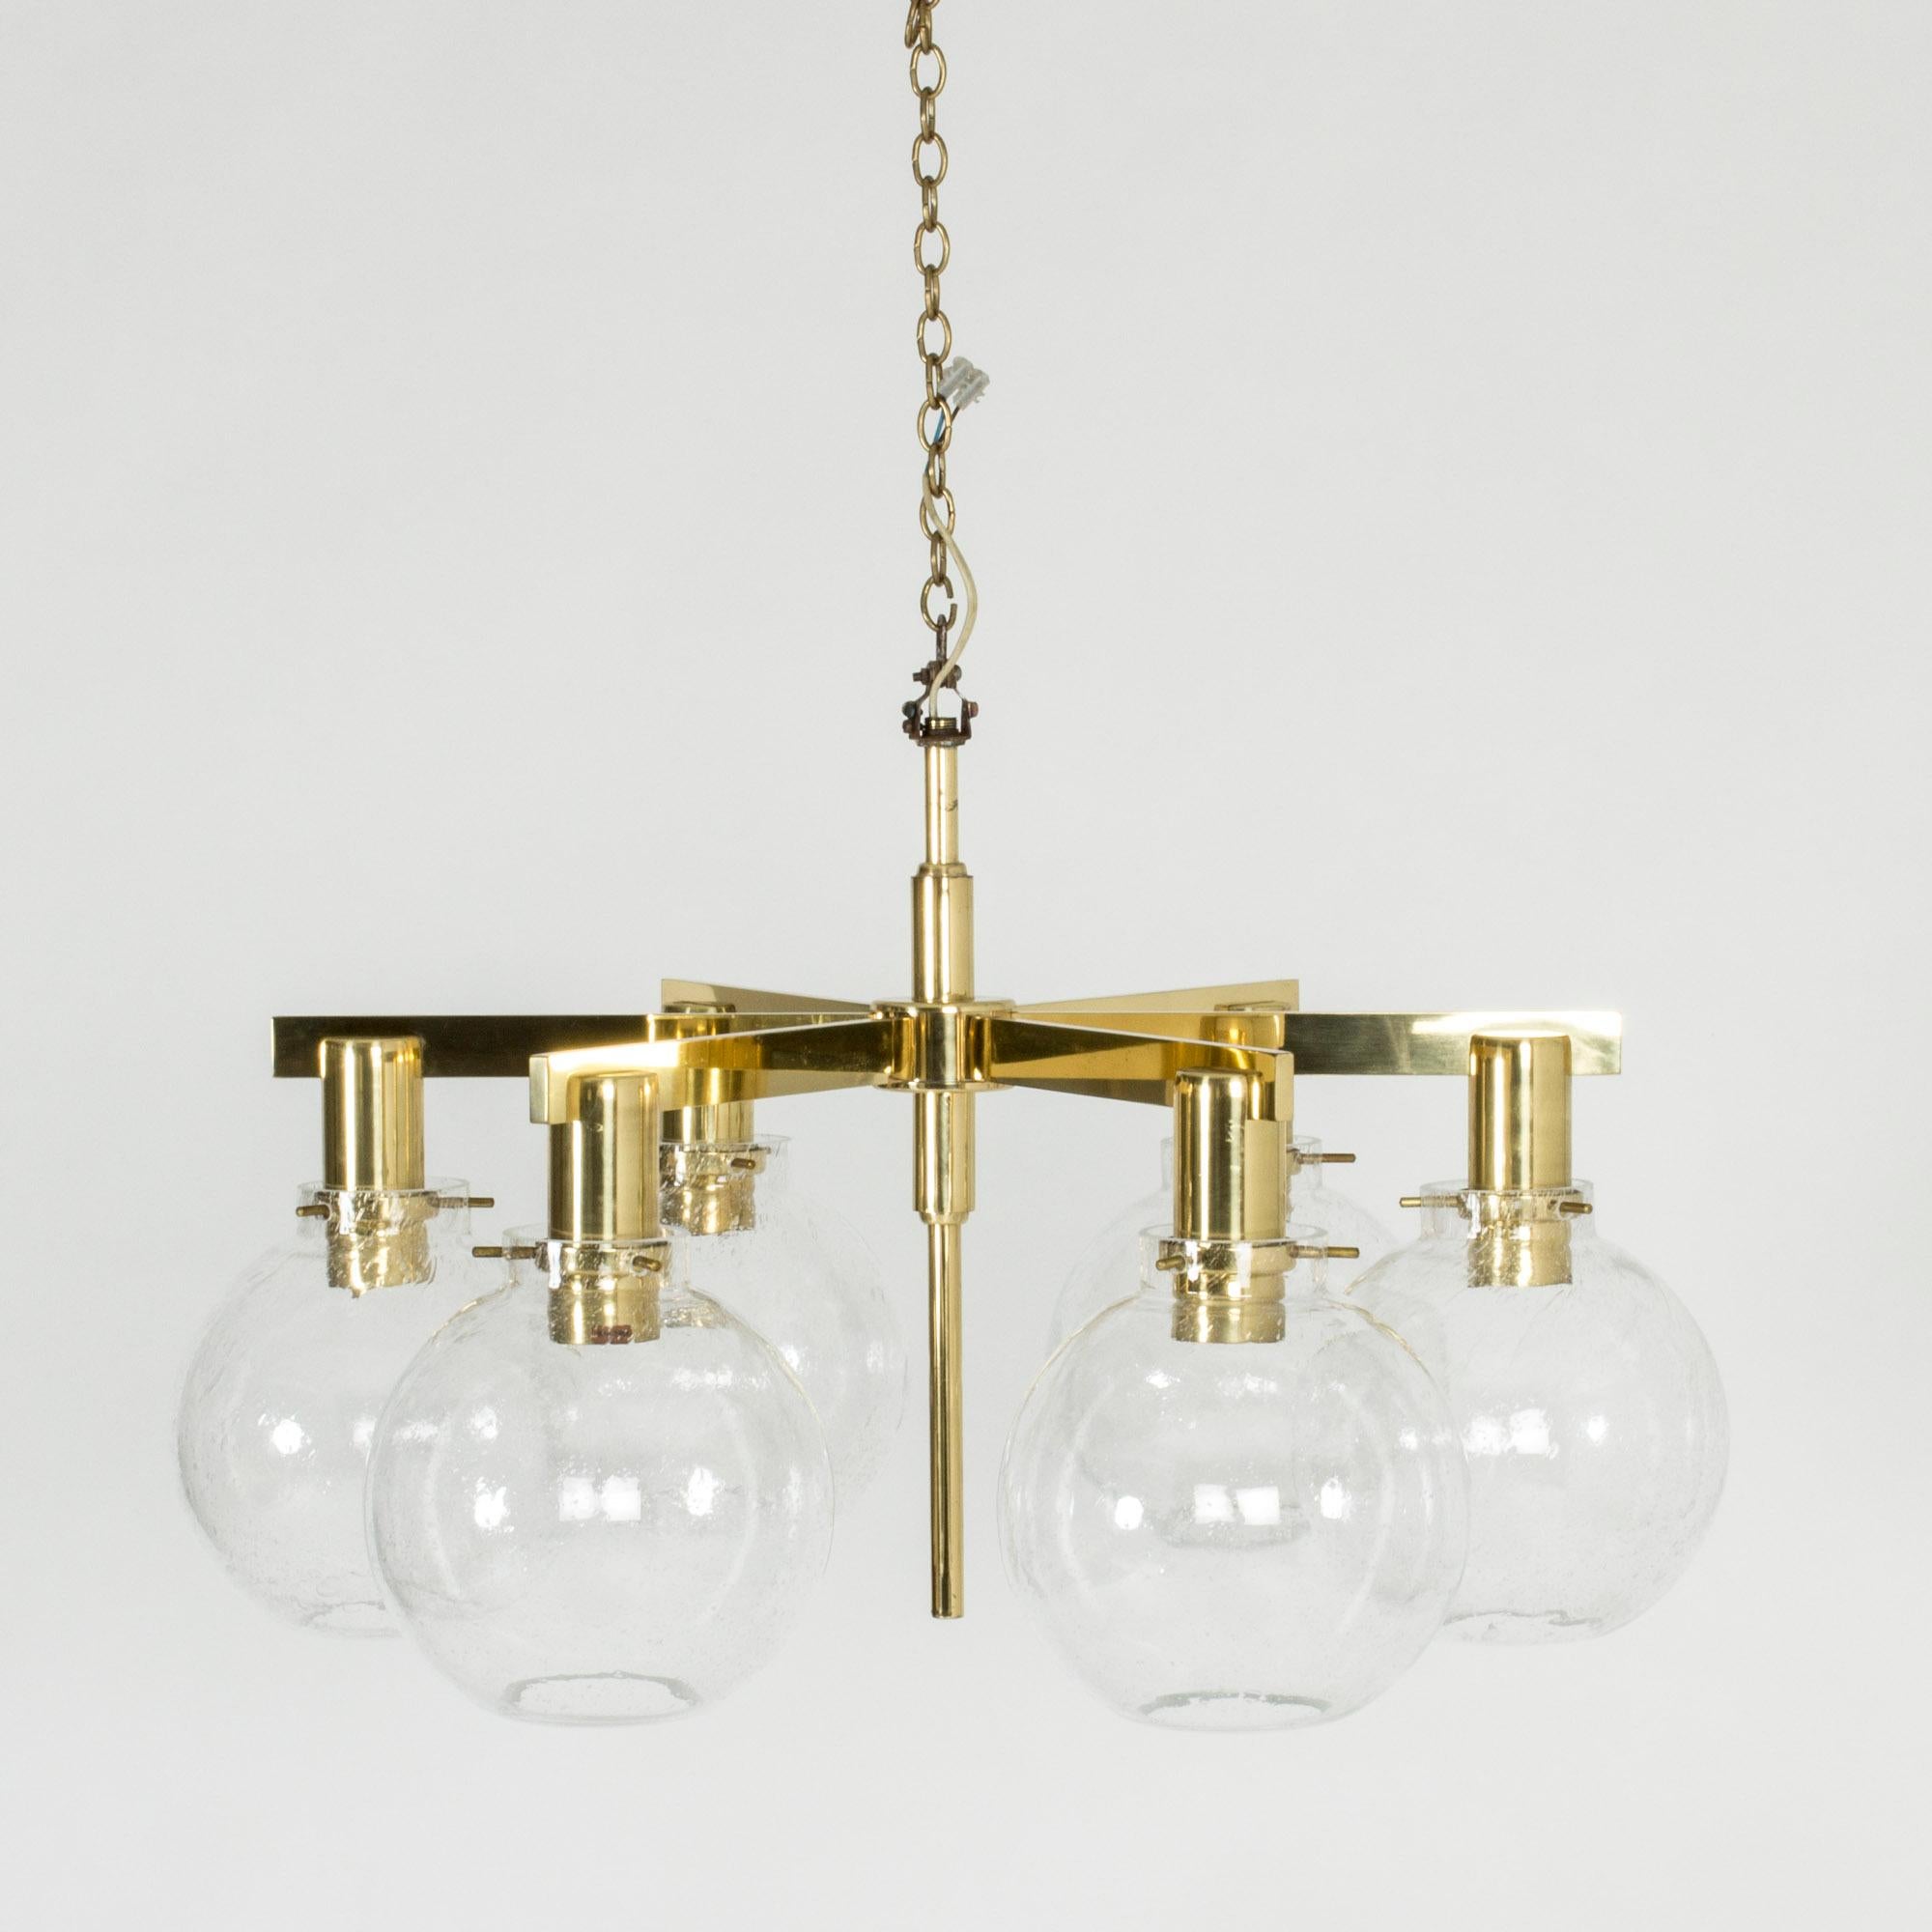 Beautiful brass and glass chandelier by Hans-Agne Jakobsson. Clear glass shades with bubbles in the glass, suspended with brass pins. The body of the chandelier hangs from a brass chain.